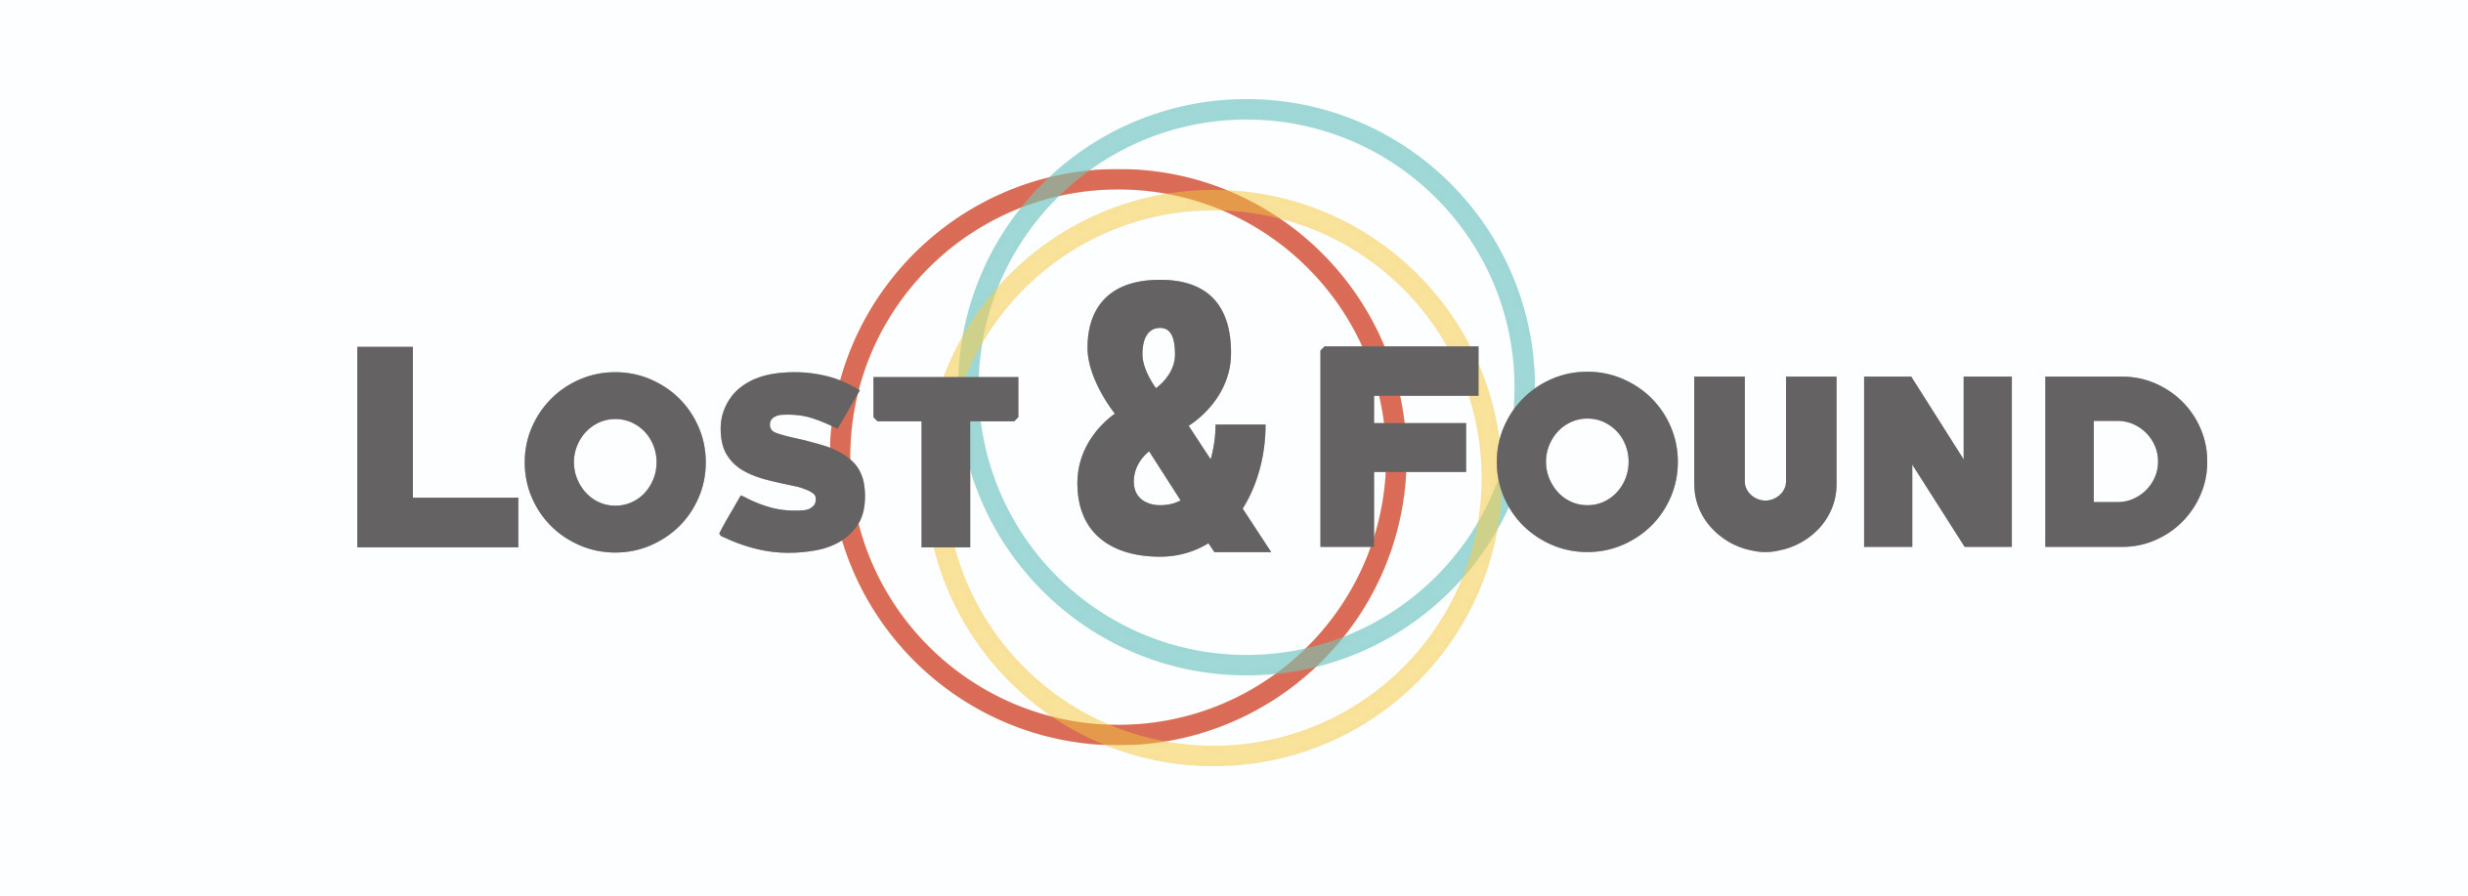 Lost and Found Association logo